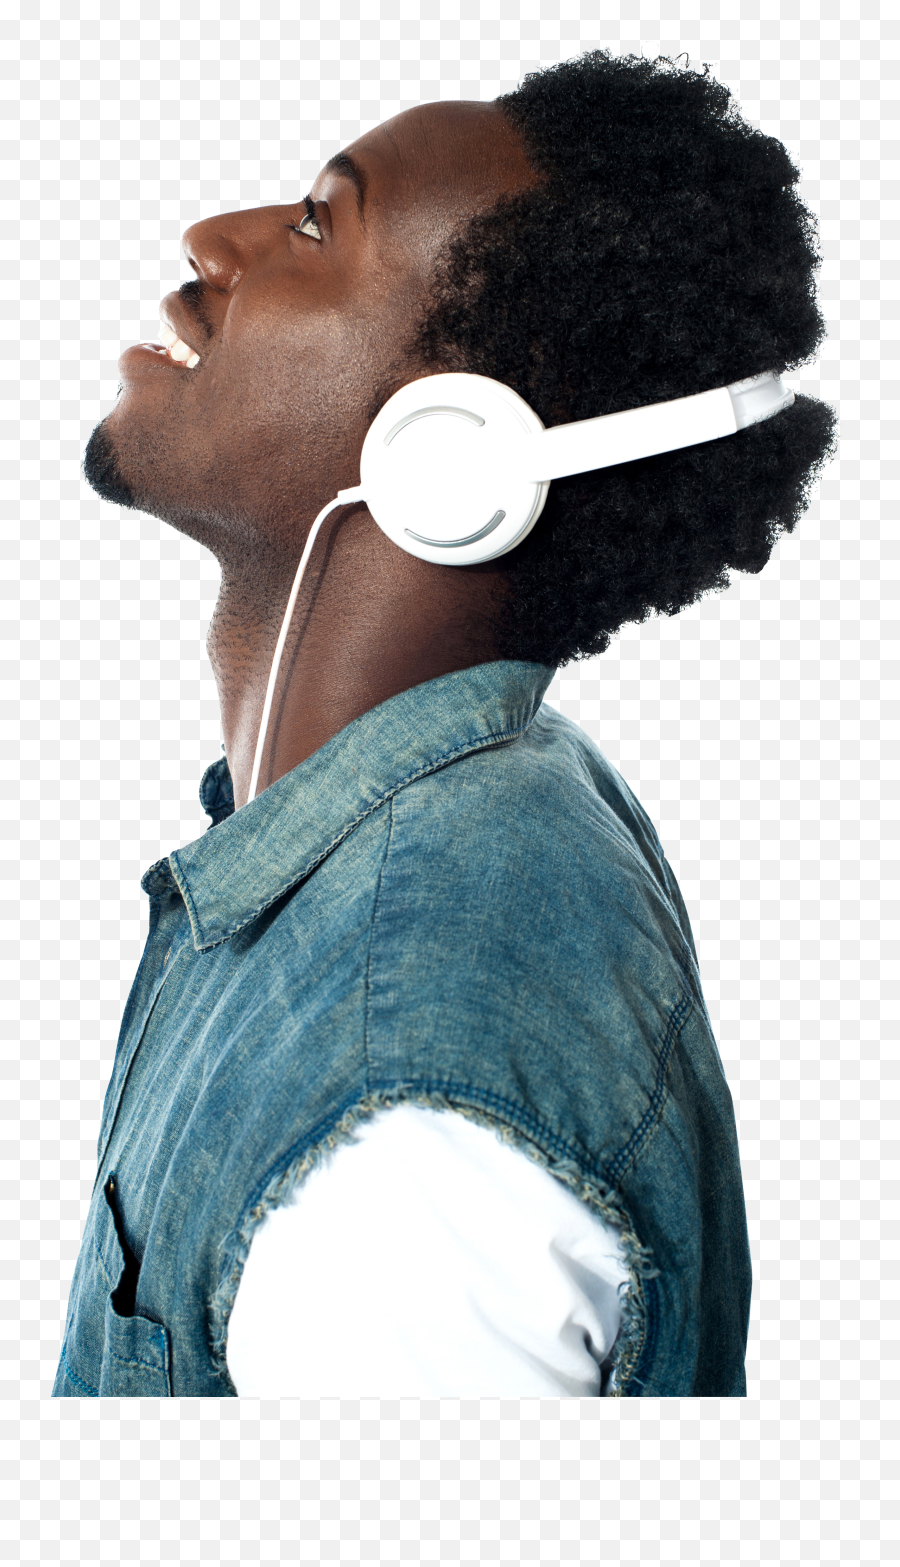 Listening Music Png Images Transparent Background Png Play - Listening To Music Png Emoji,Headphones Png